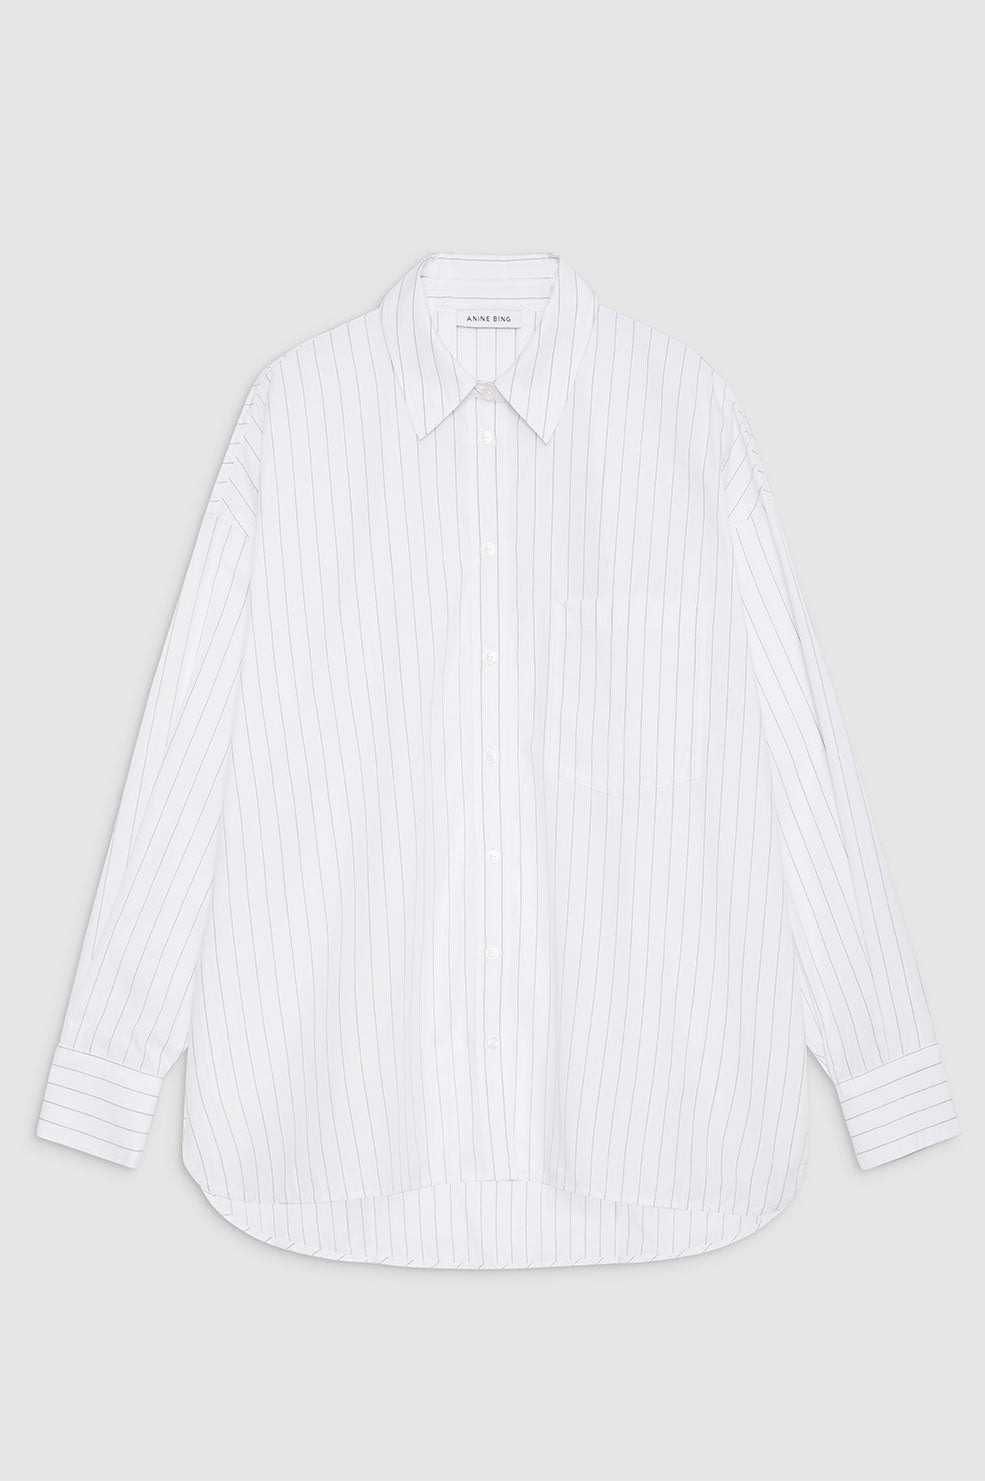 Anine Bing Mika Shirt in White And Lavender Stripe - ShopStyle Tops